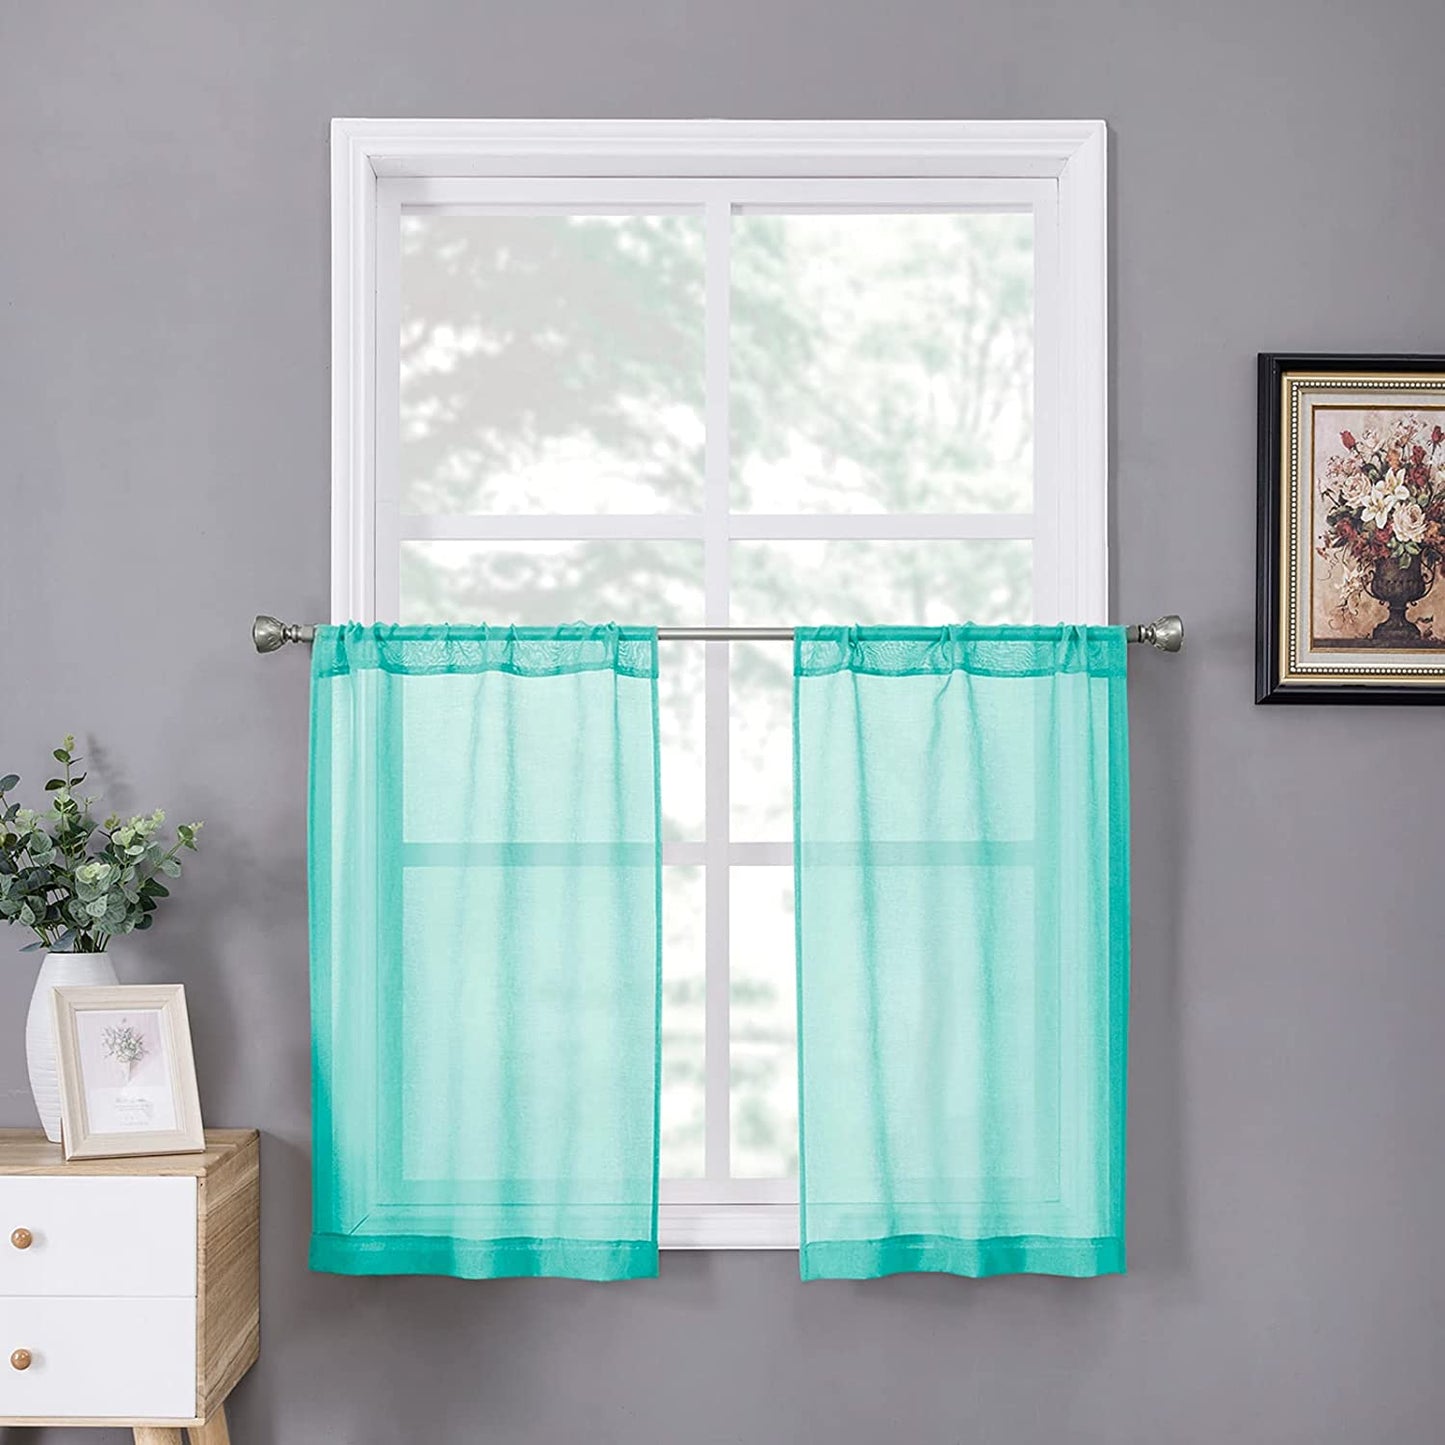 Tollpiz Short Sheer Curtains Linen Textured Bedroom Curtain Sheers Light Filtering Rod Pocket Voile Curtains for Living Room, 54 X 45 Inches Long, White, Set of 2 Panels  Tollpiz Tex Aqua Blue 25"W X 24"L 